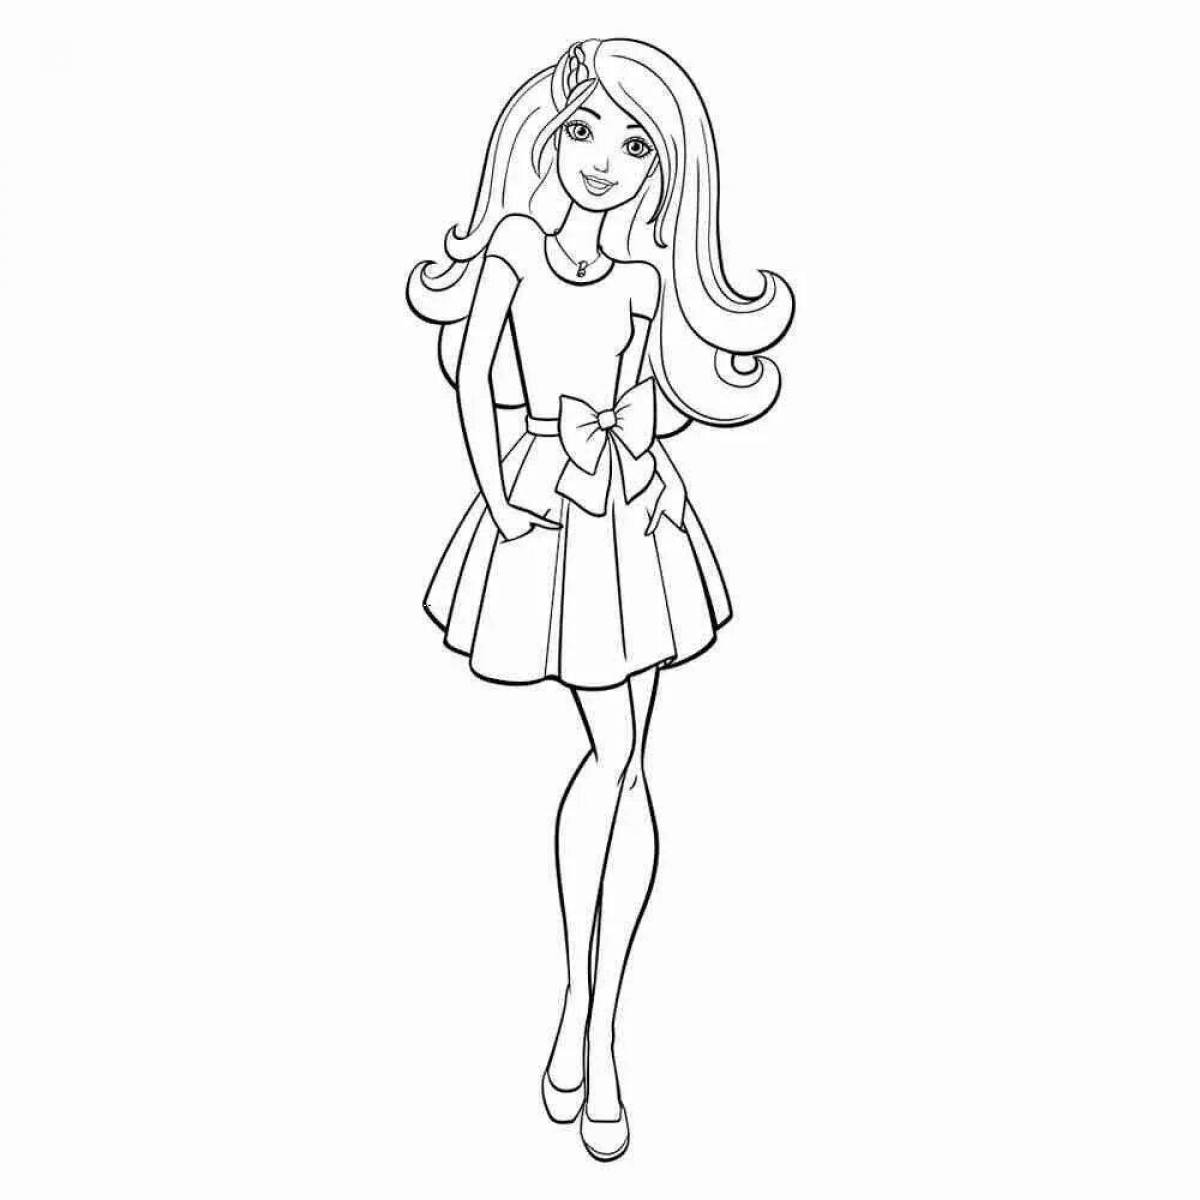 Charming barbie drawing coloring book